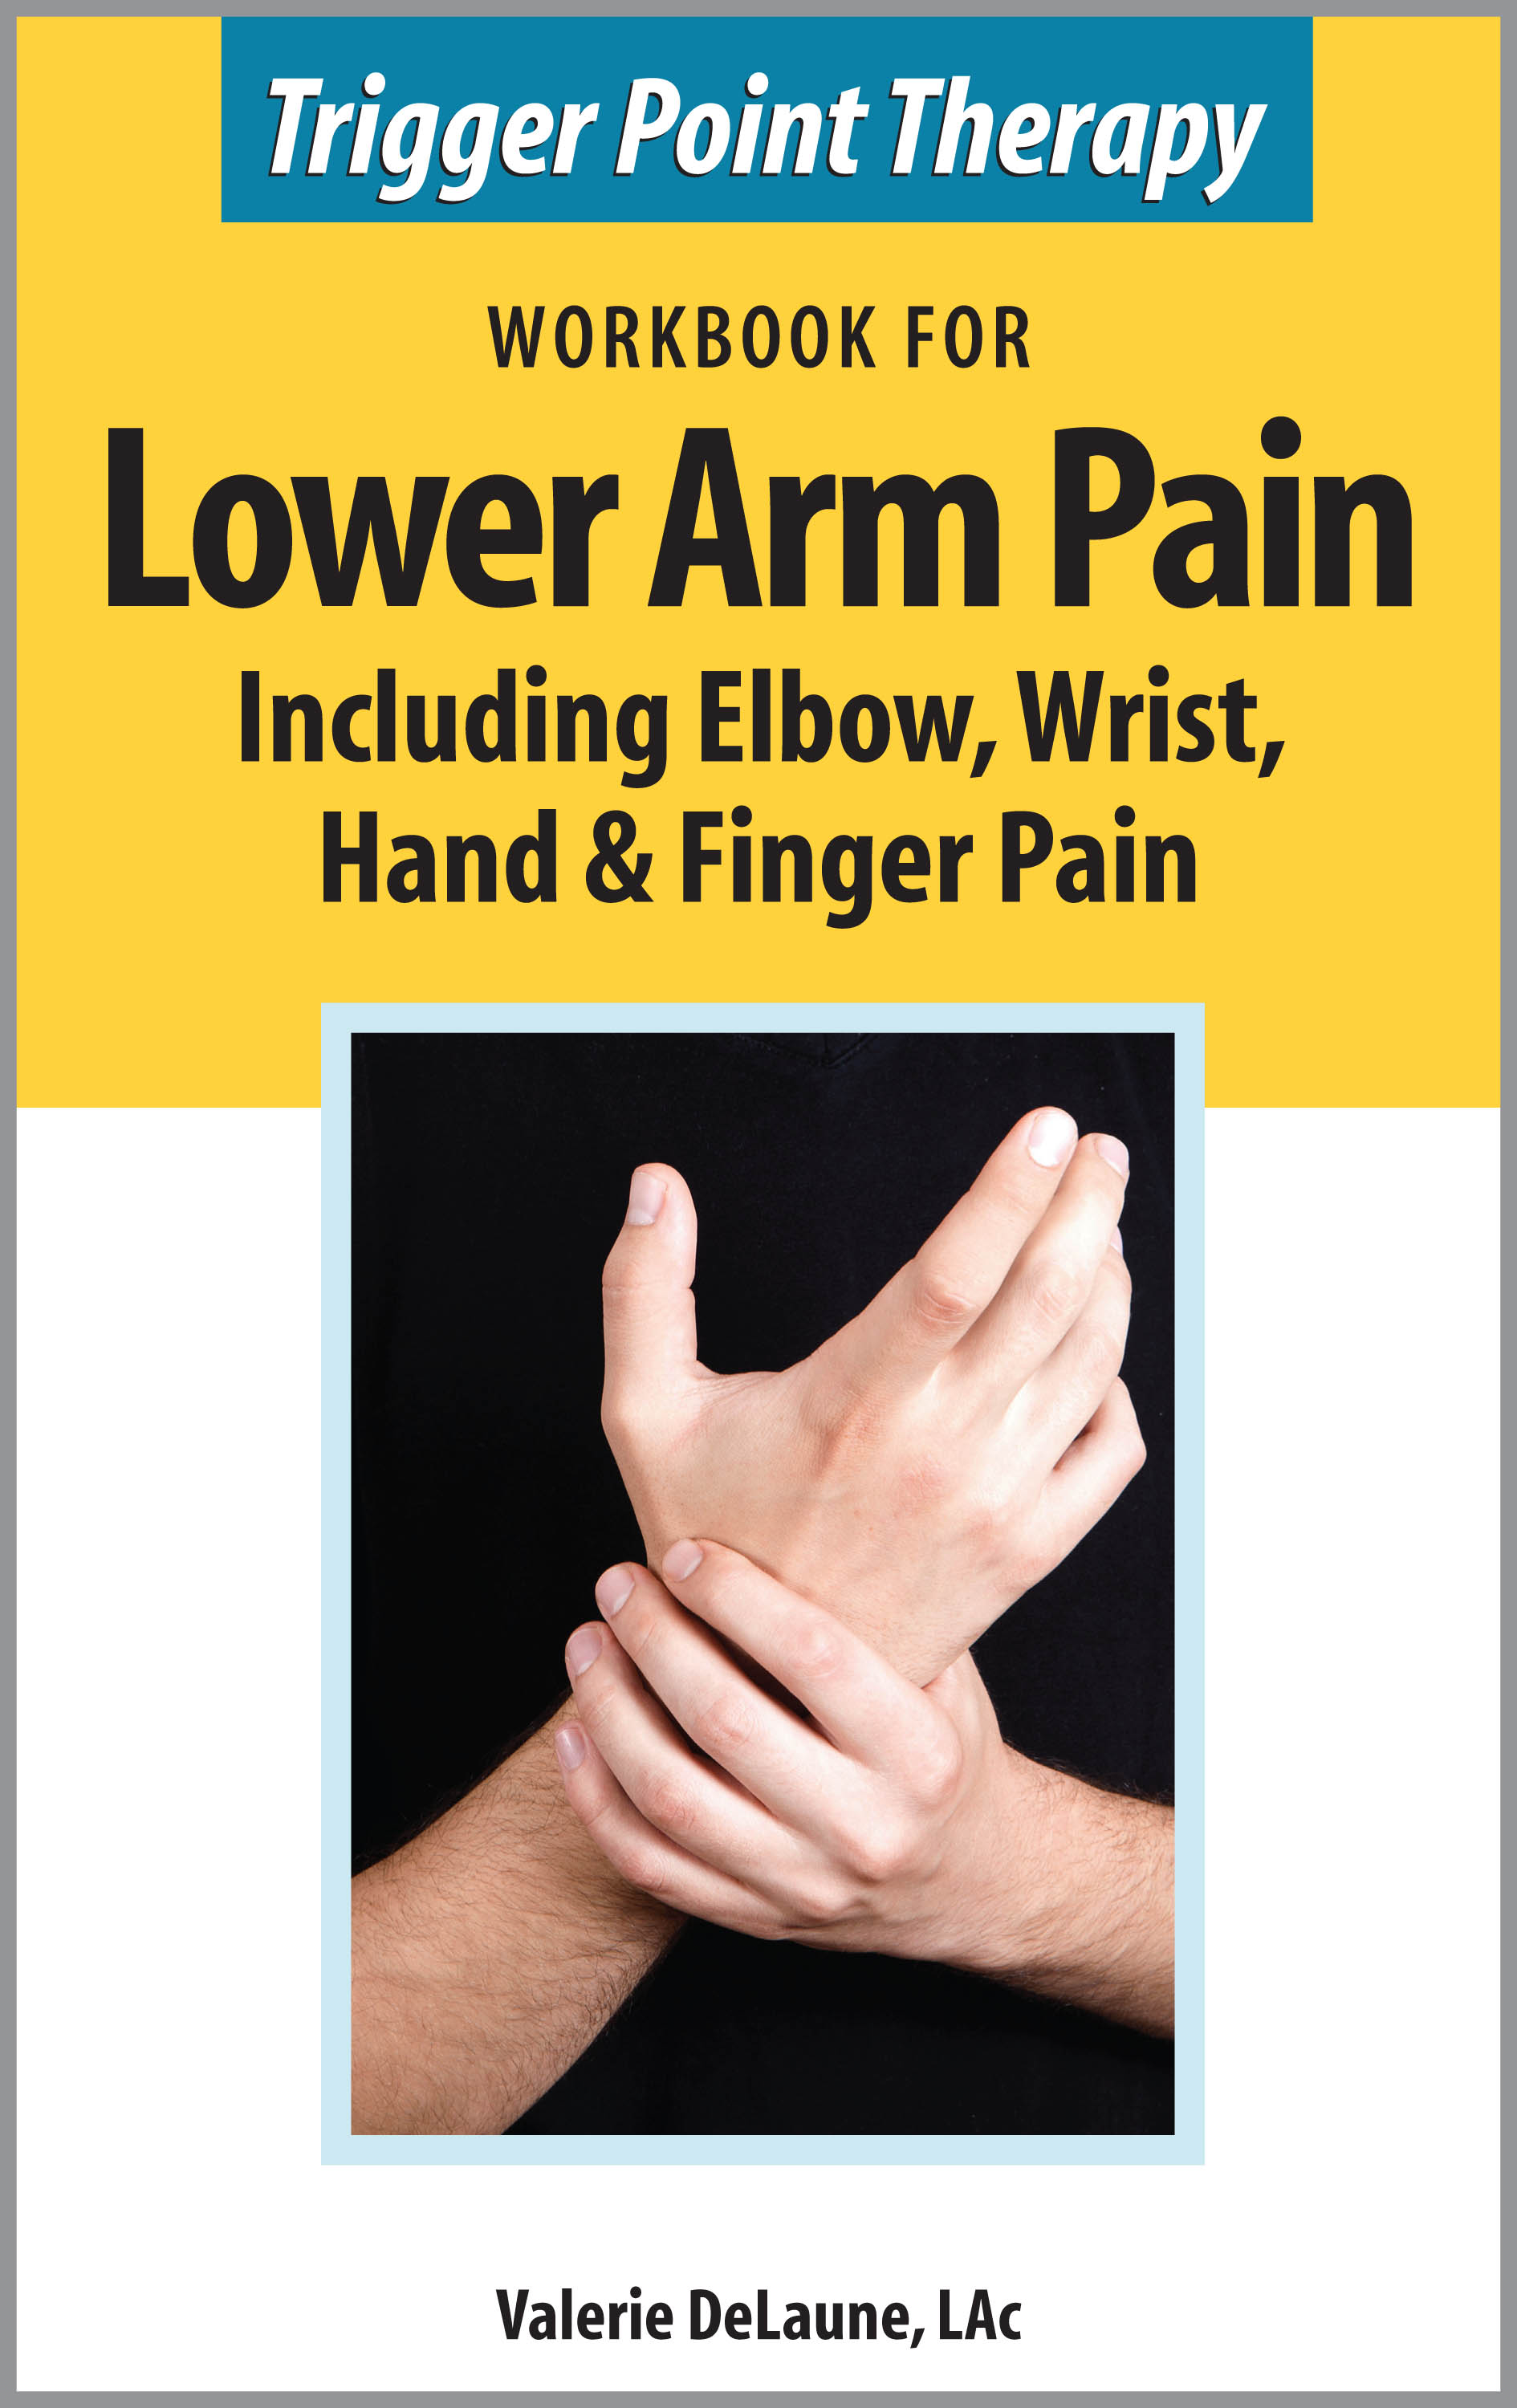 Trigger Point Therapy for Lower Arm Pain